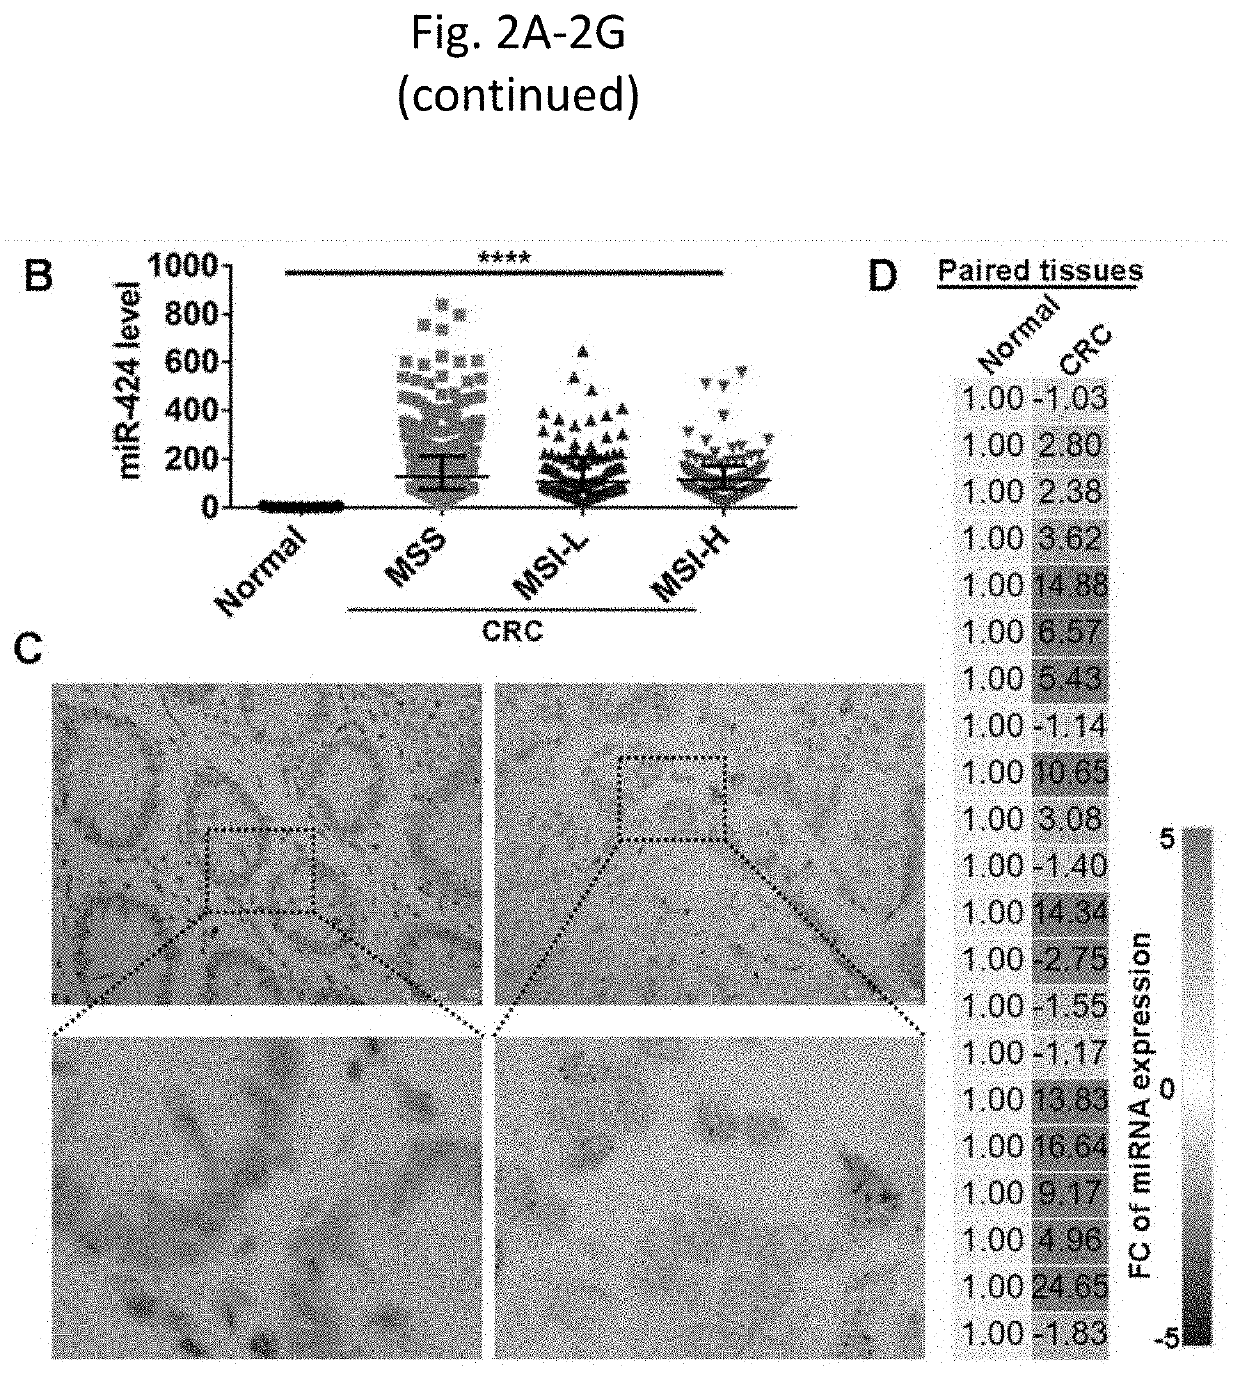 Tumor cell-derived exosomes and method of treating colorectal cancer